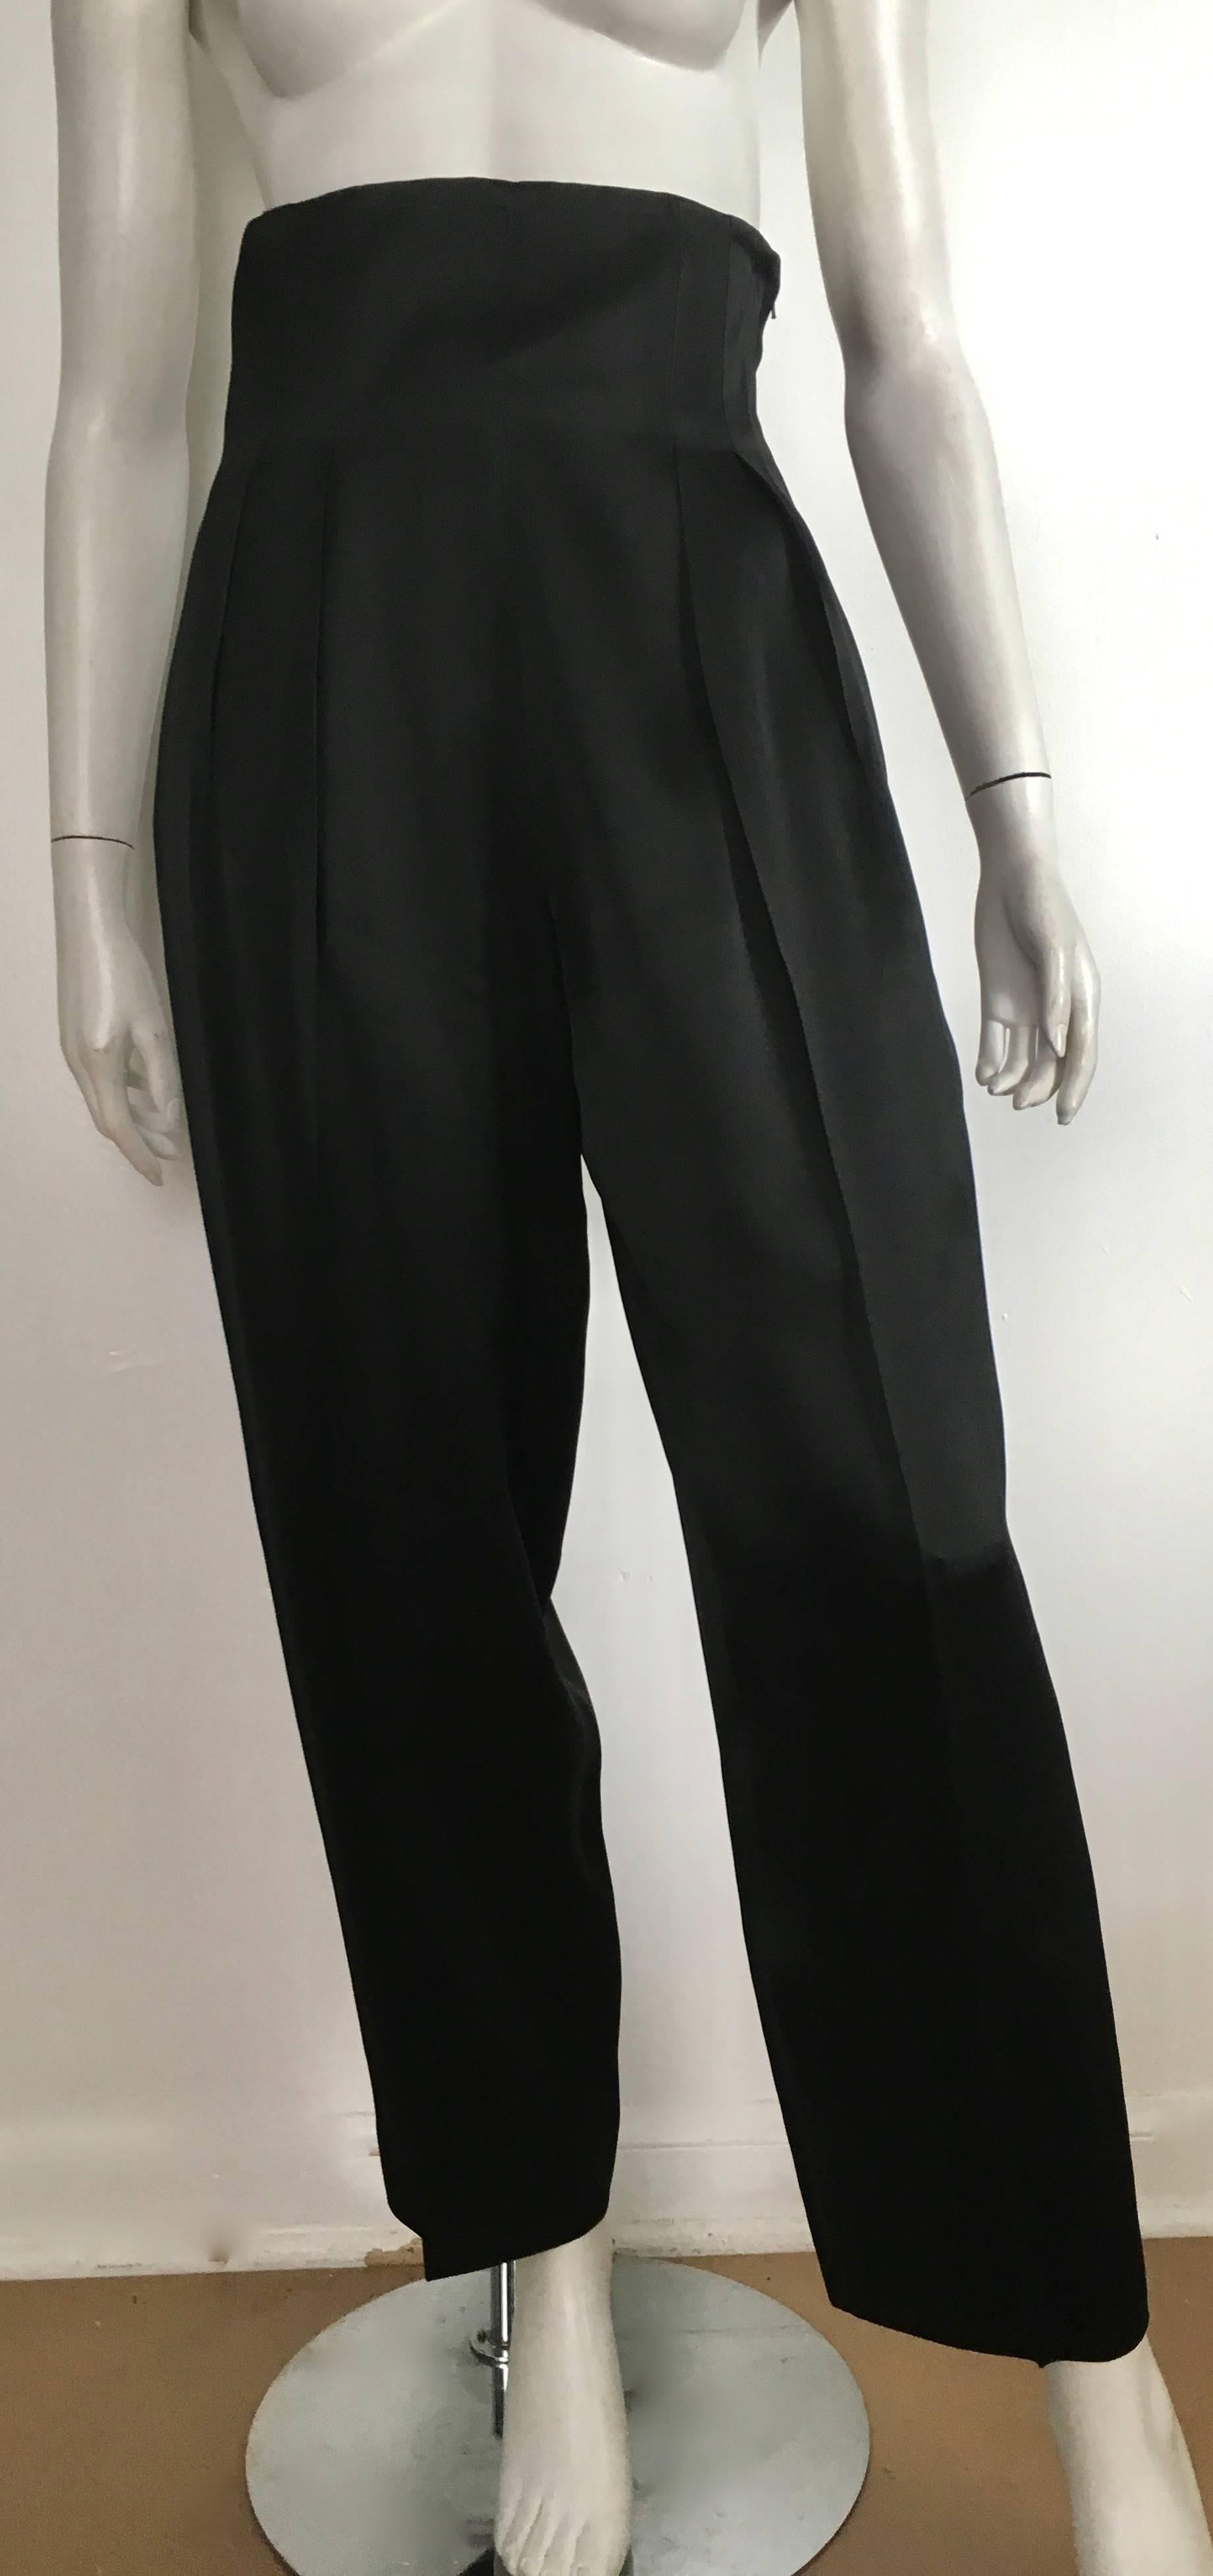 Patrick Kelly Paris 1980s black satin high waisted wide leg evening pants with pockets will fit a size 4/6.  The waist is 28